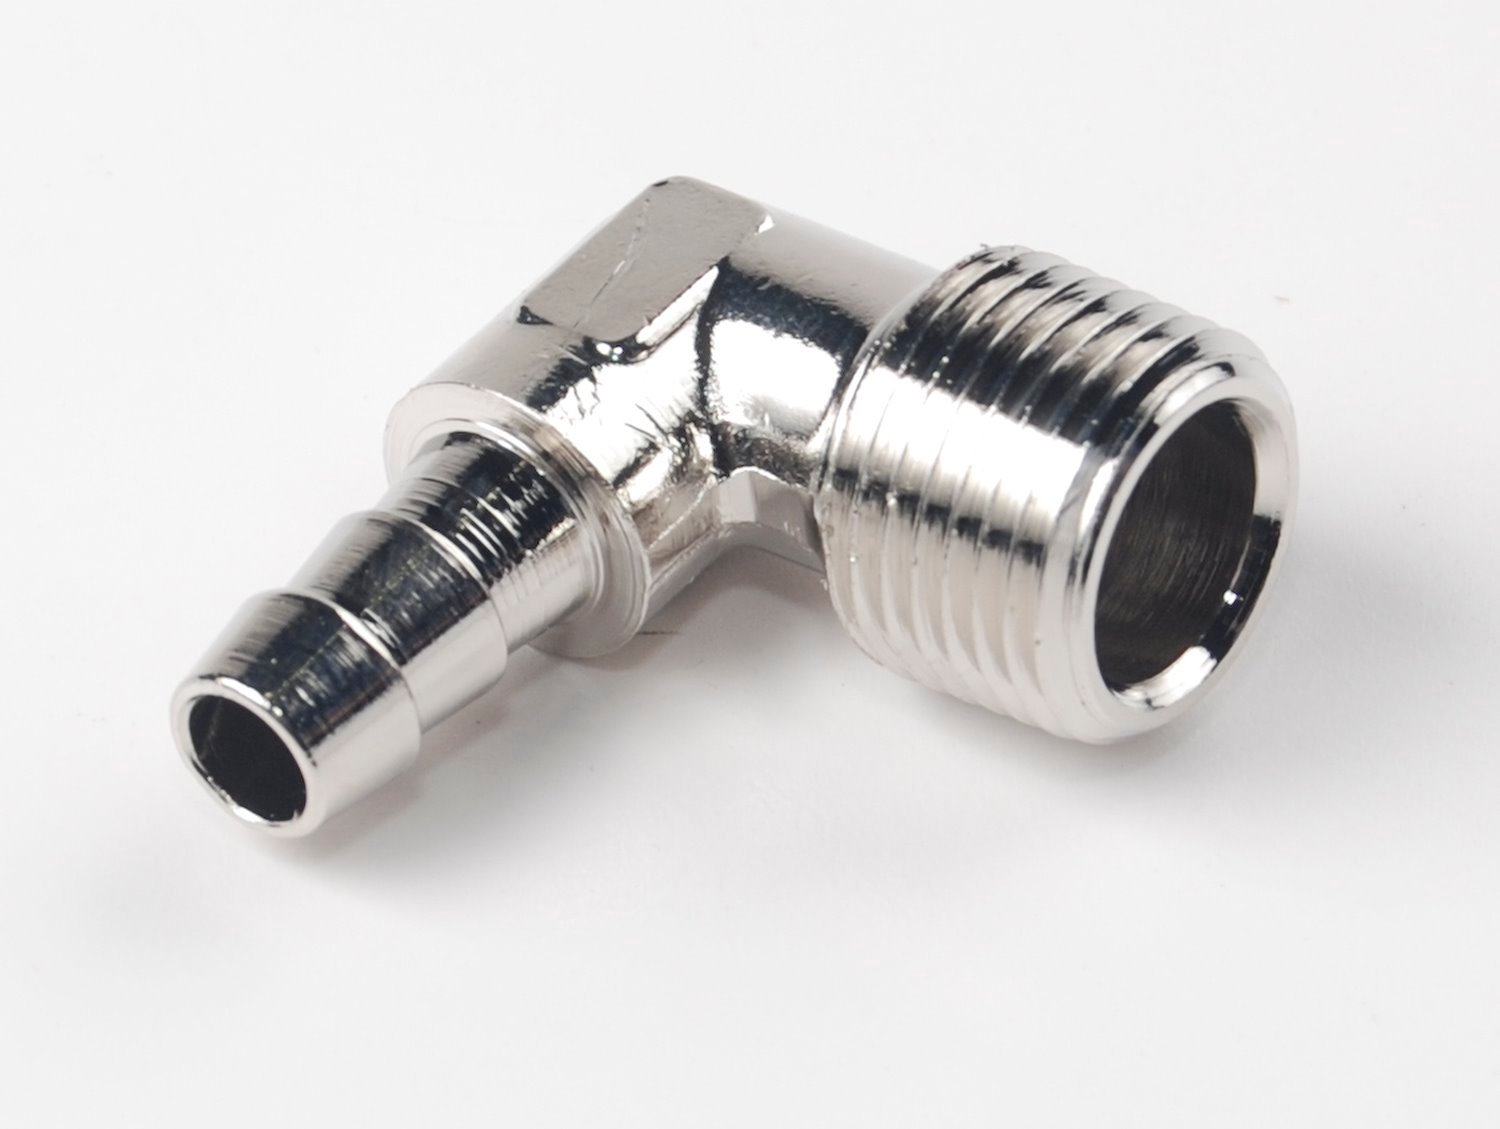 NPT 90-Degree Hose Barb Fitting [3/8 in. NPT to 5/16 in. Hose, Nickel-Plated Brass]